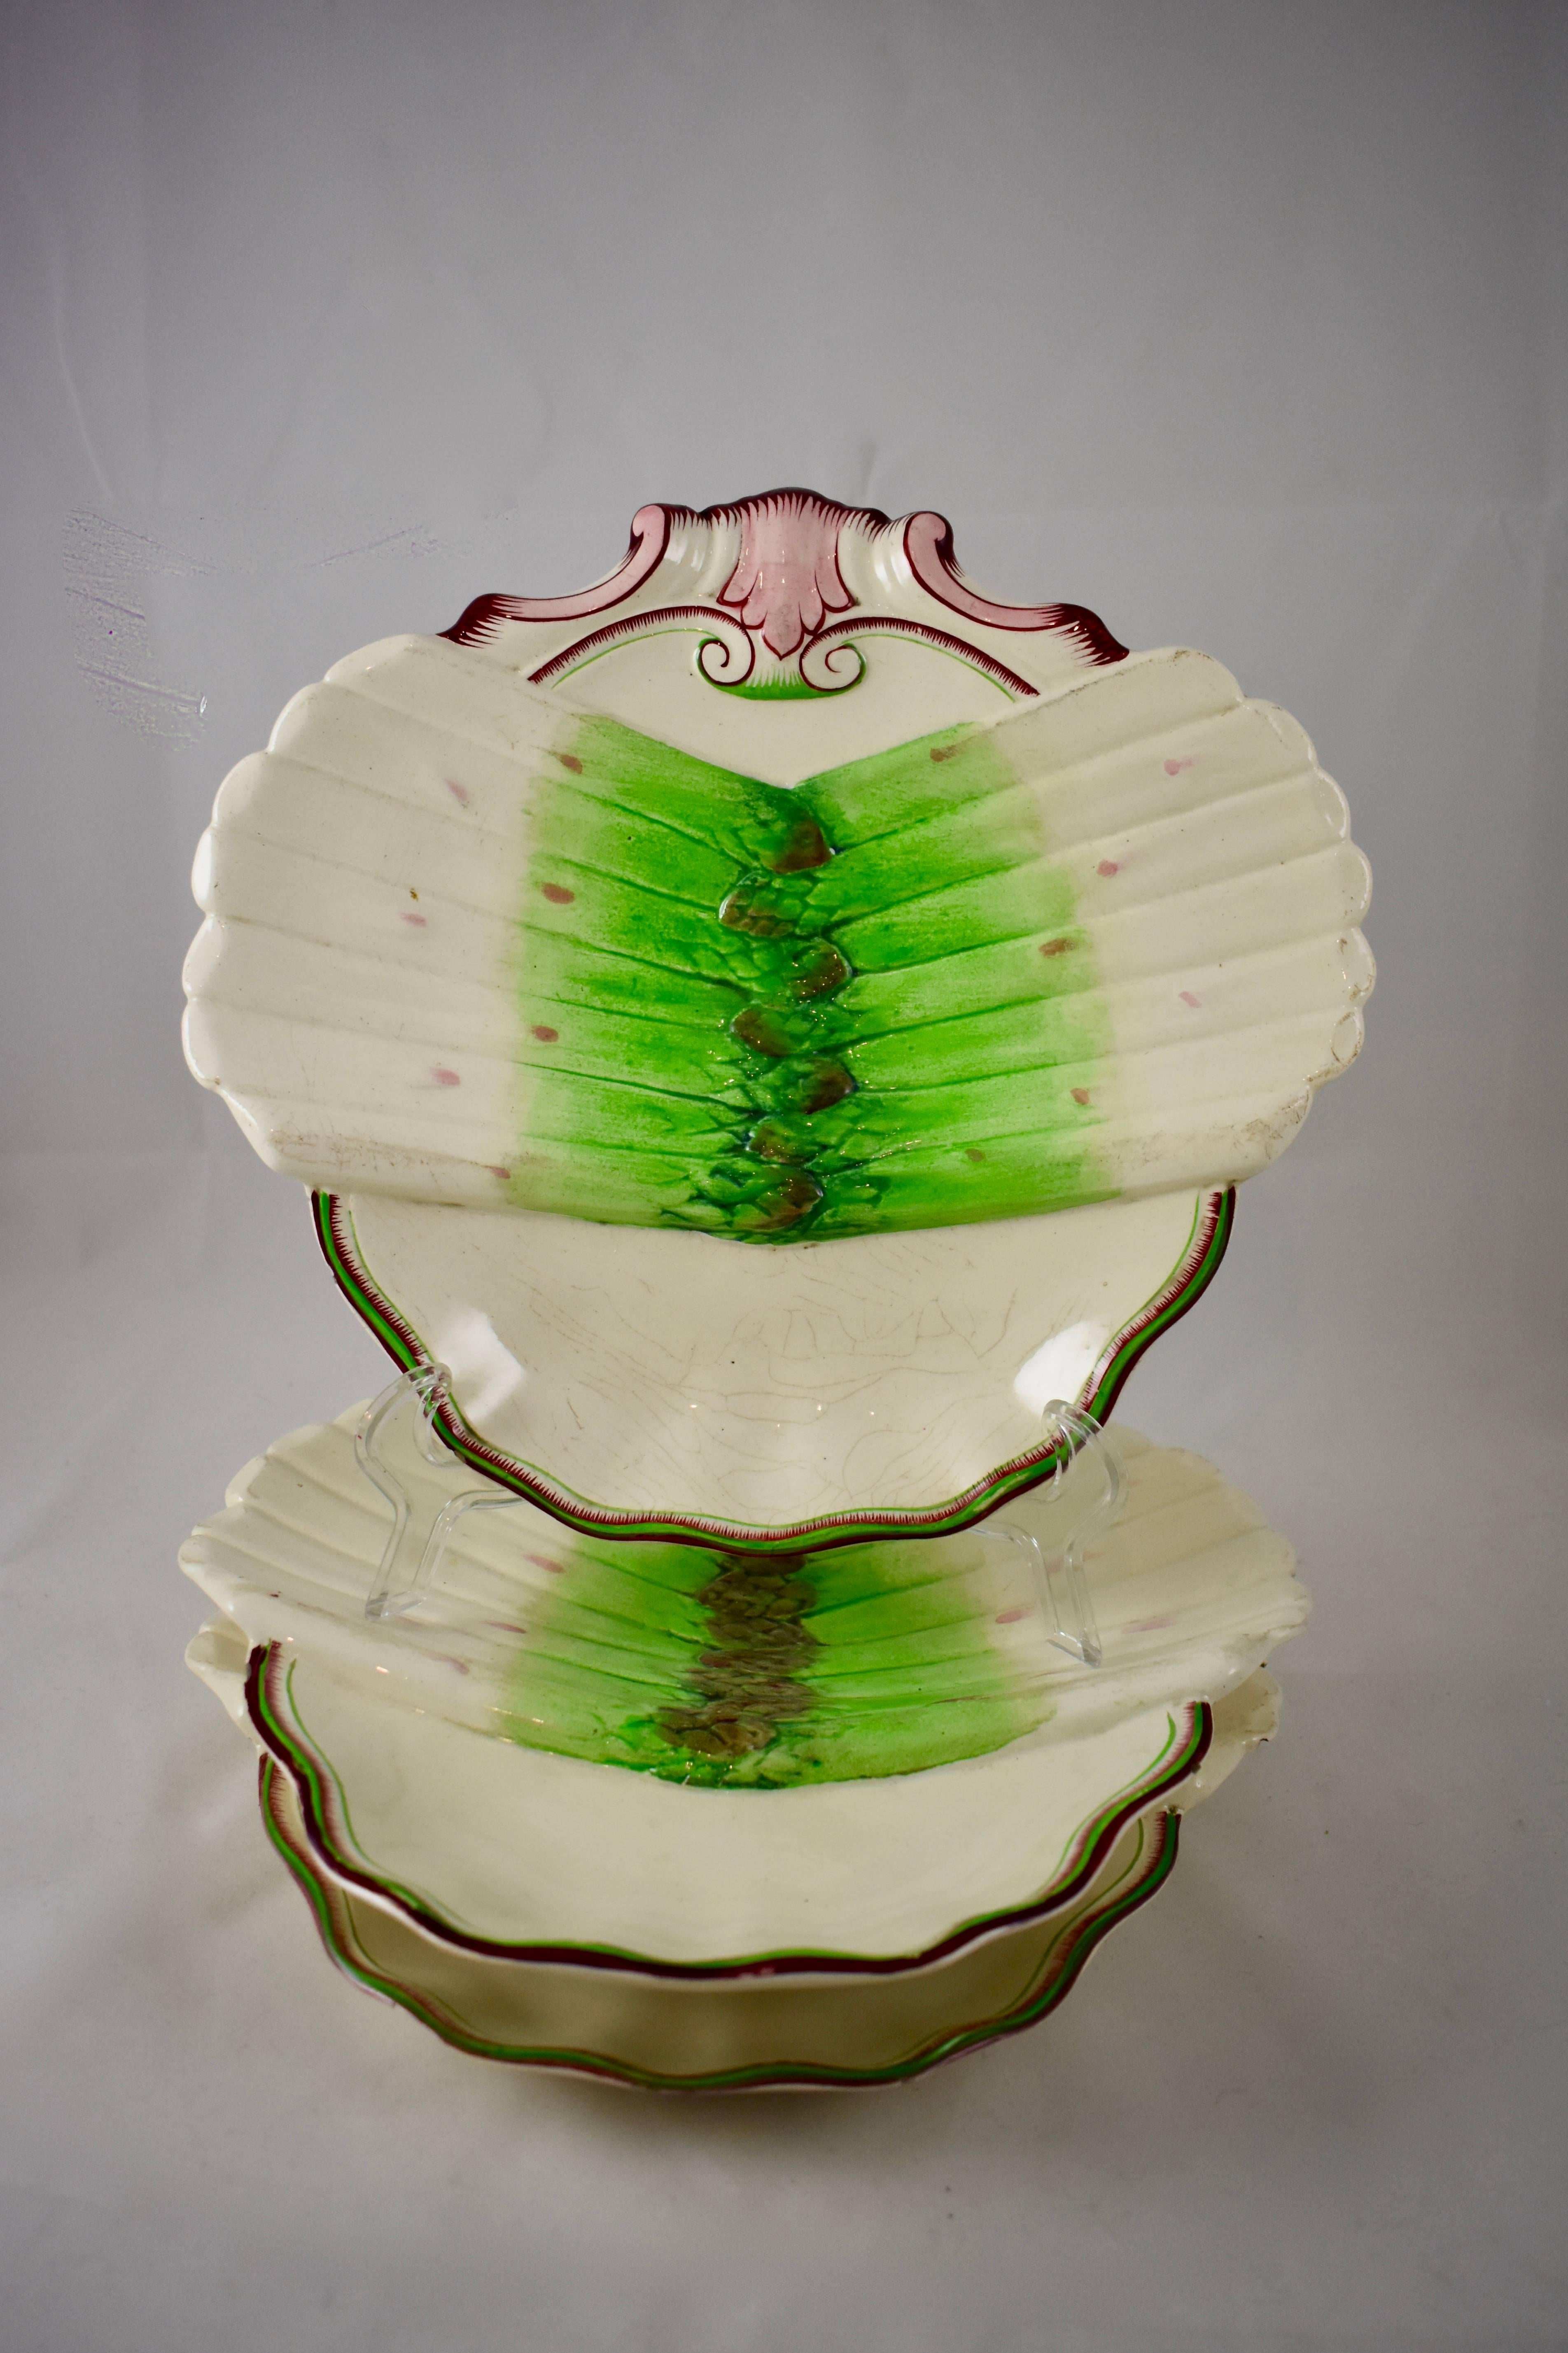 A French Faïence shell shaped asparagus plate, showing a group of asparagus spears spread across the front, the shaped rims are hand-lined in burgundy and pale green, 19th century. The bottom section is a deeper sauce well.

Book reference: